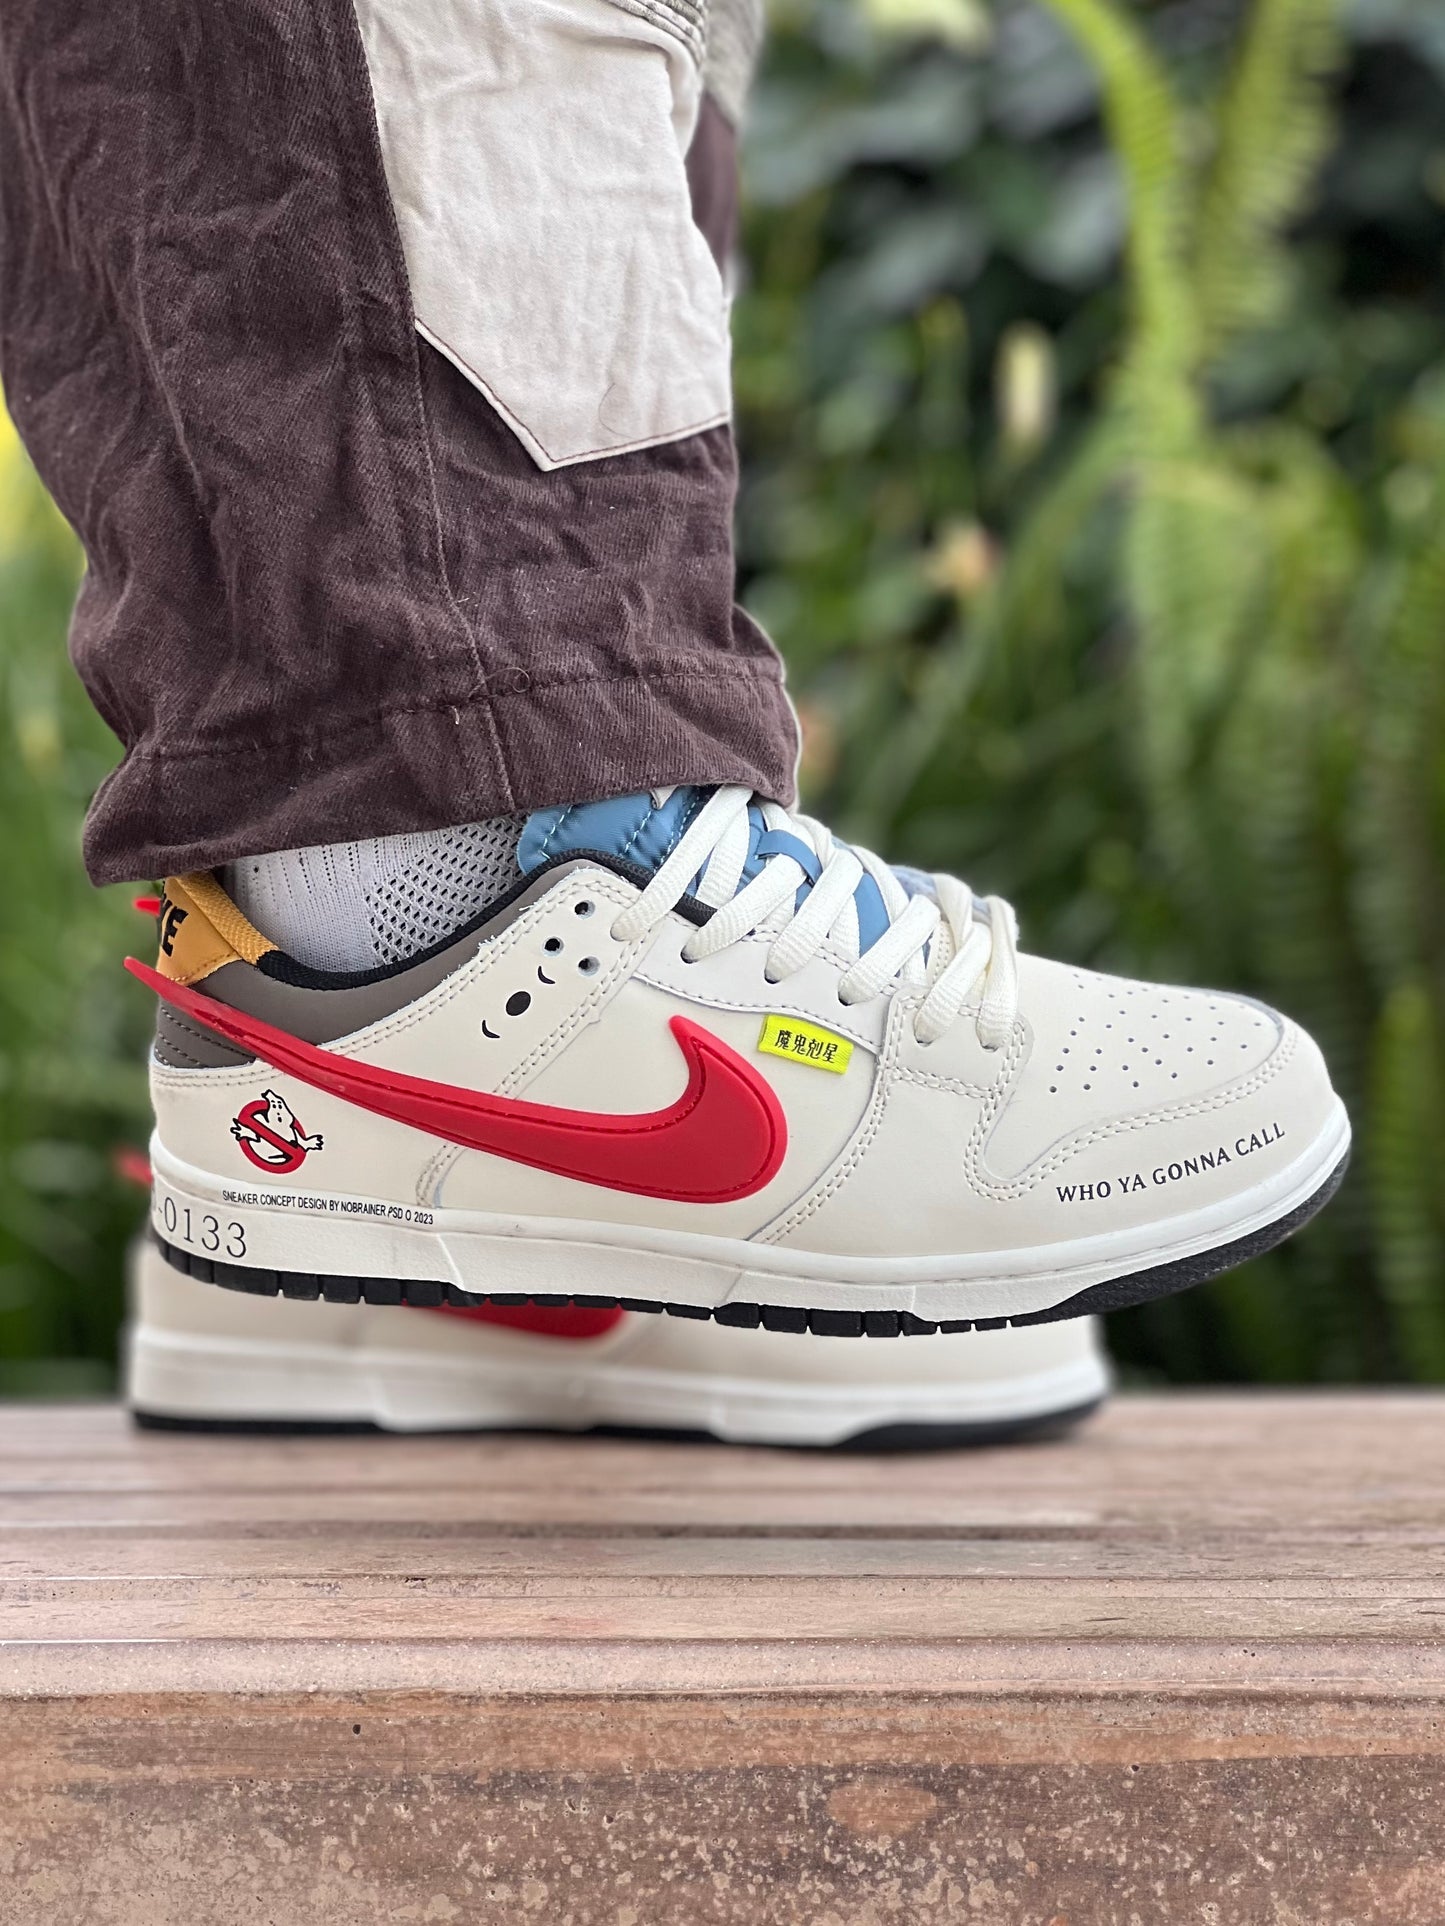 Nike Dunk Low x Ghostbusters